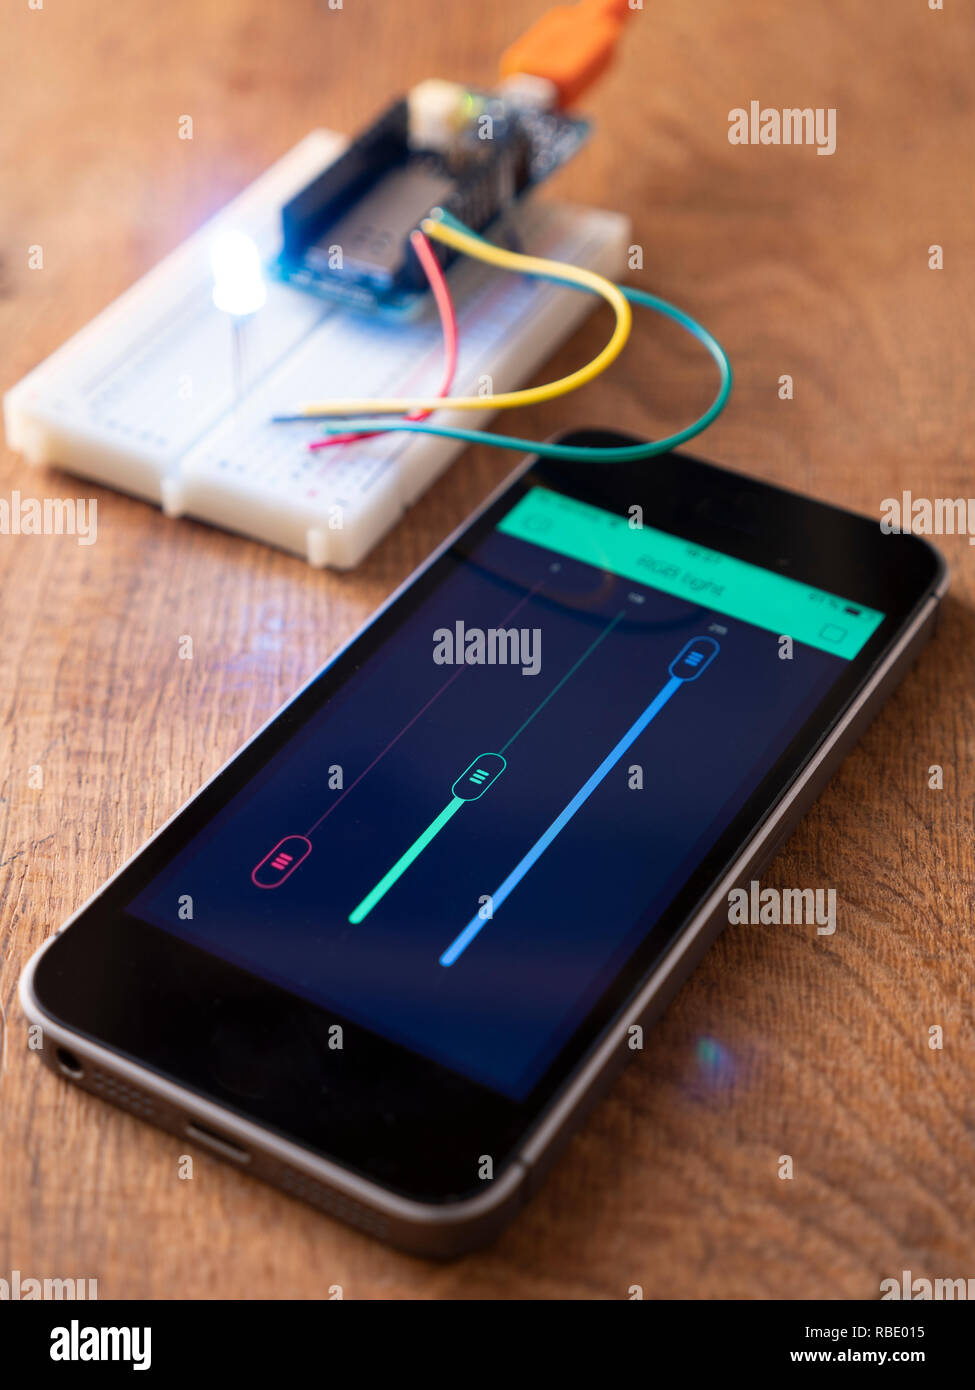 RGB Led on a breadboard with microcontroller board being controlled by a mobile phone app. Stock Photo